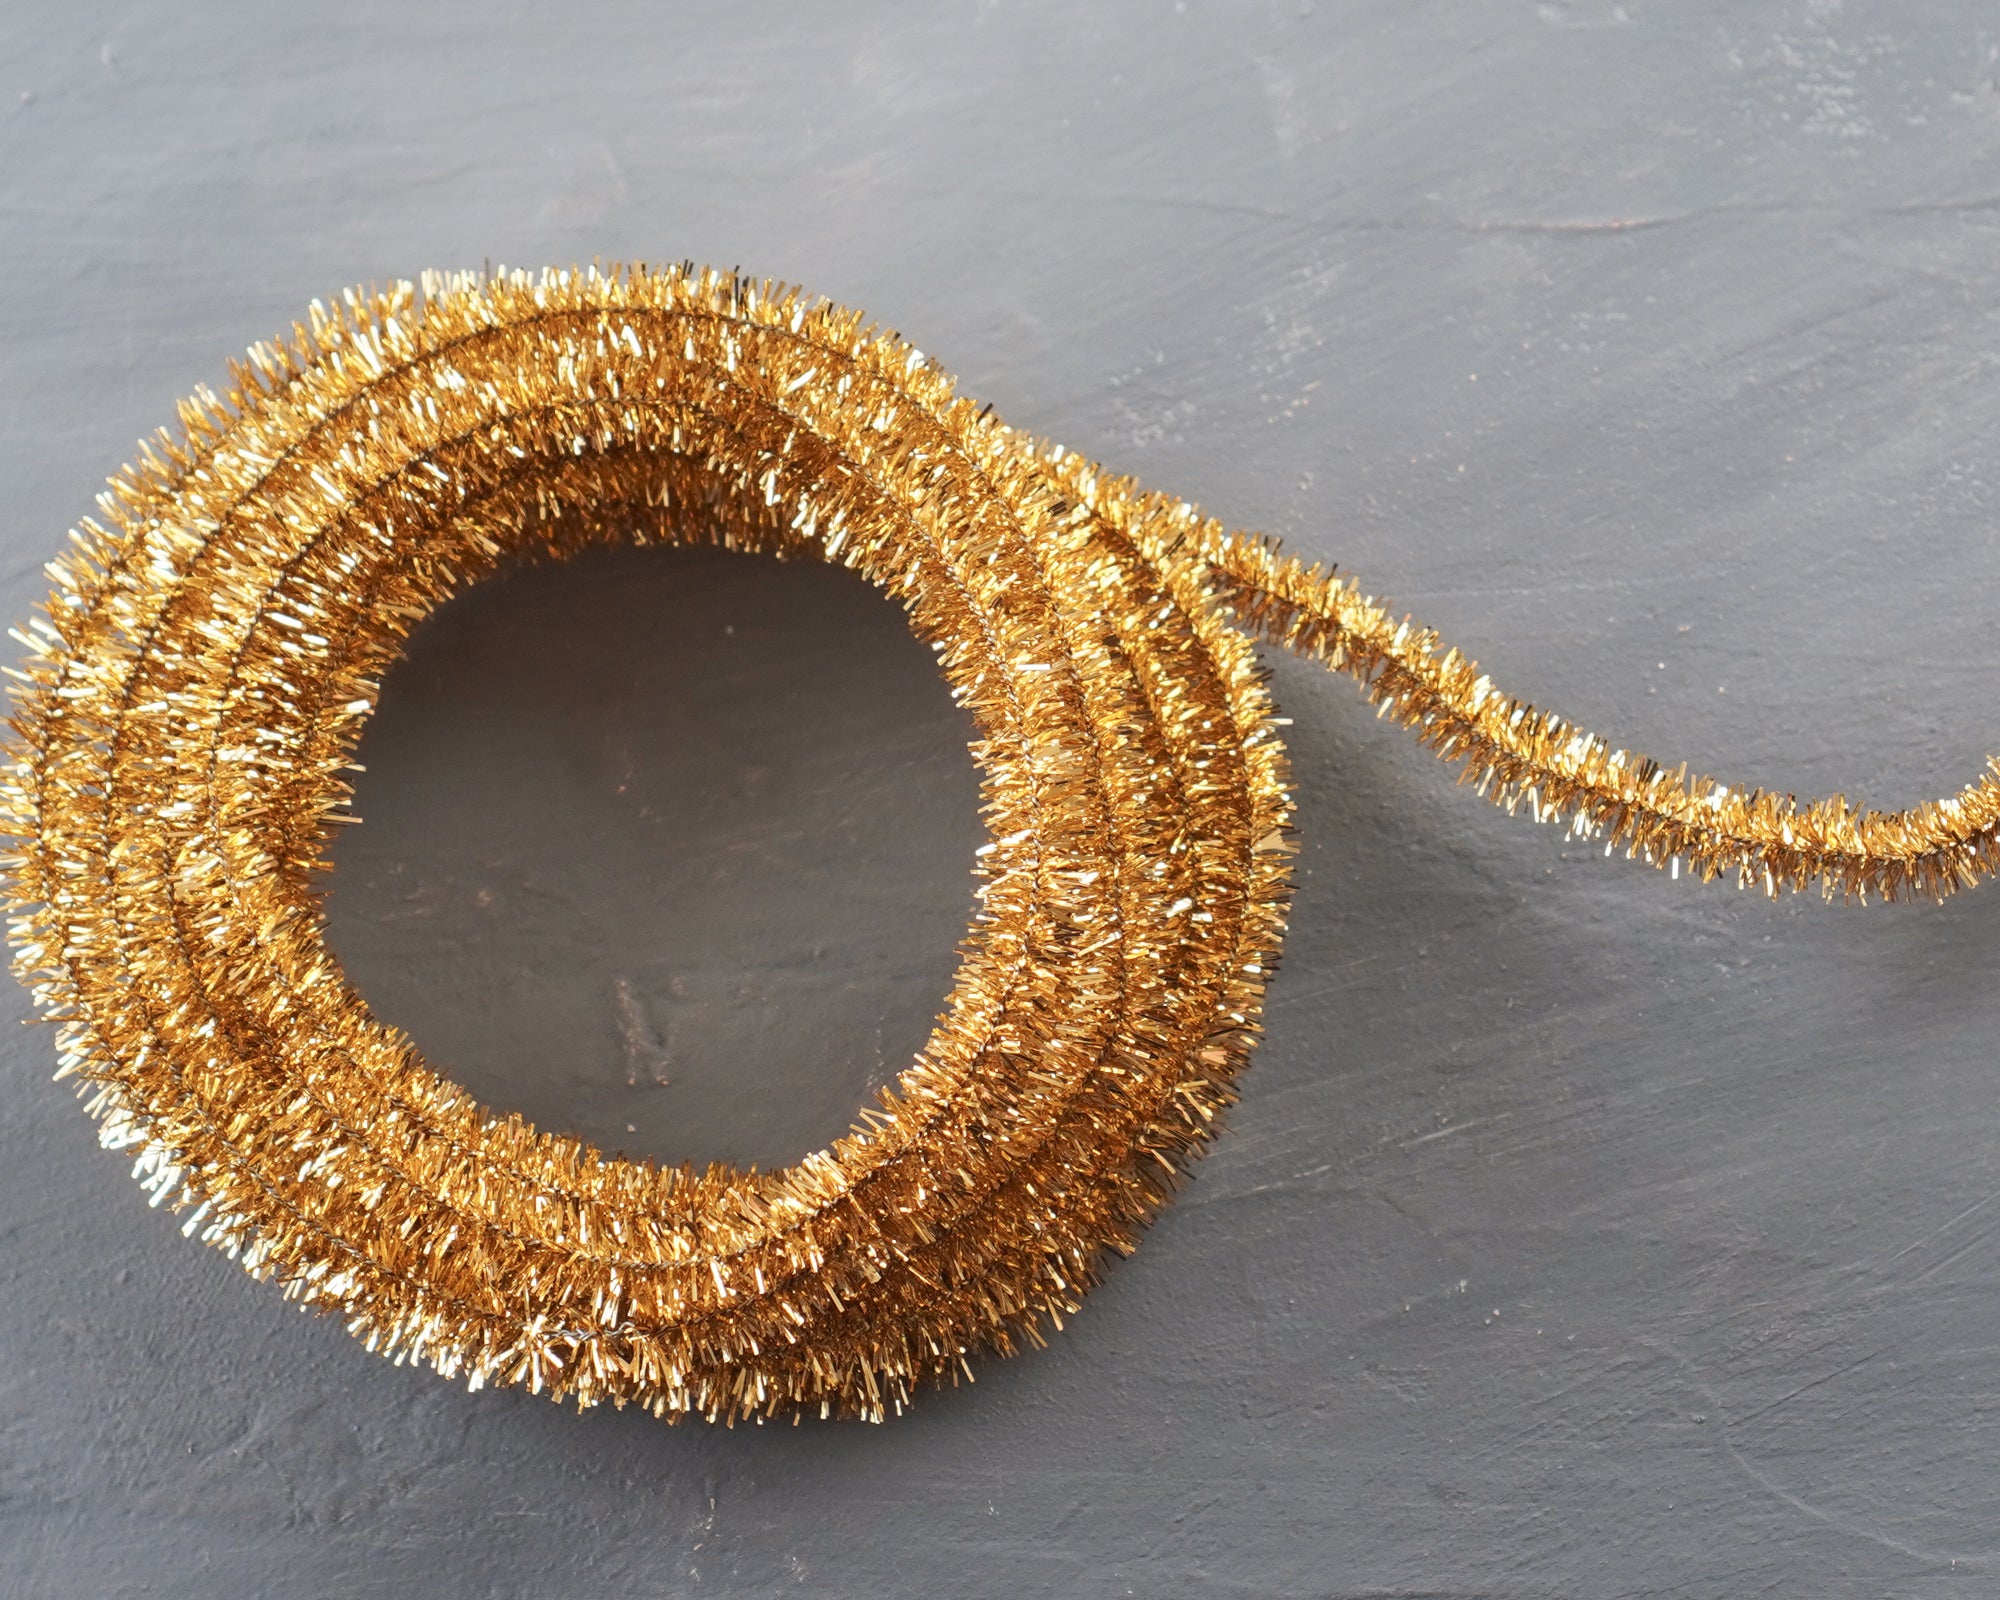 EconoCrafts: Glitter Pipe Cleaners